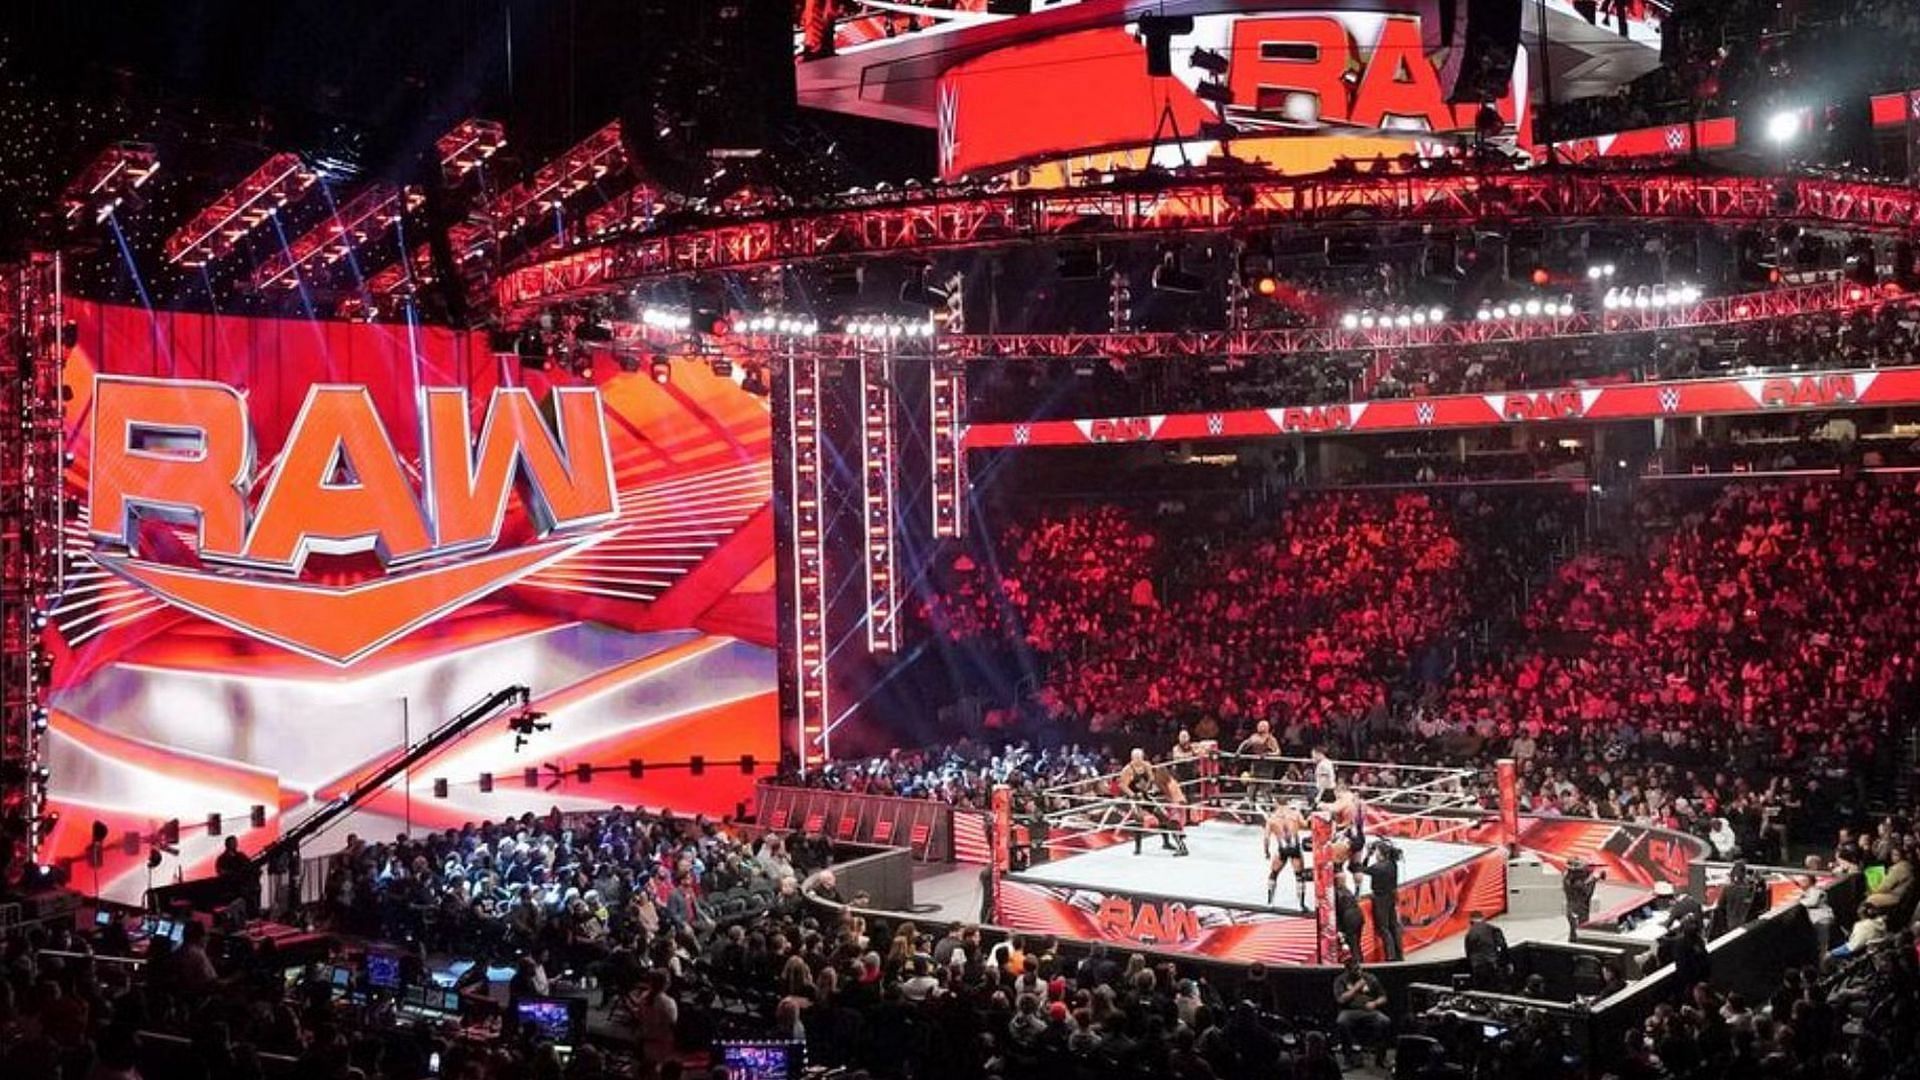 The current WWE RAW logo and set